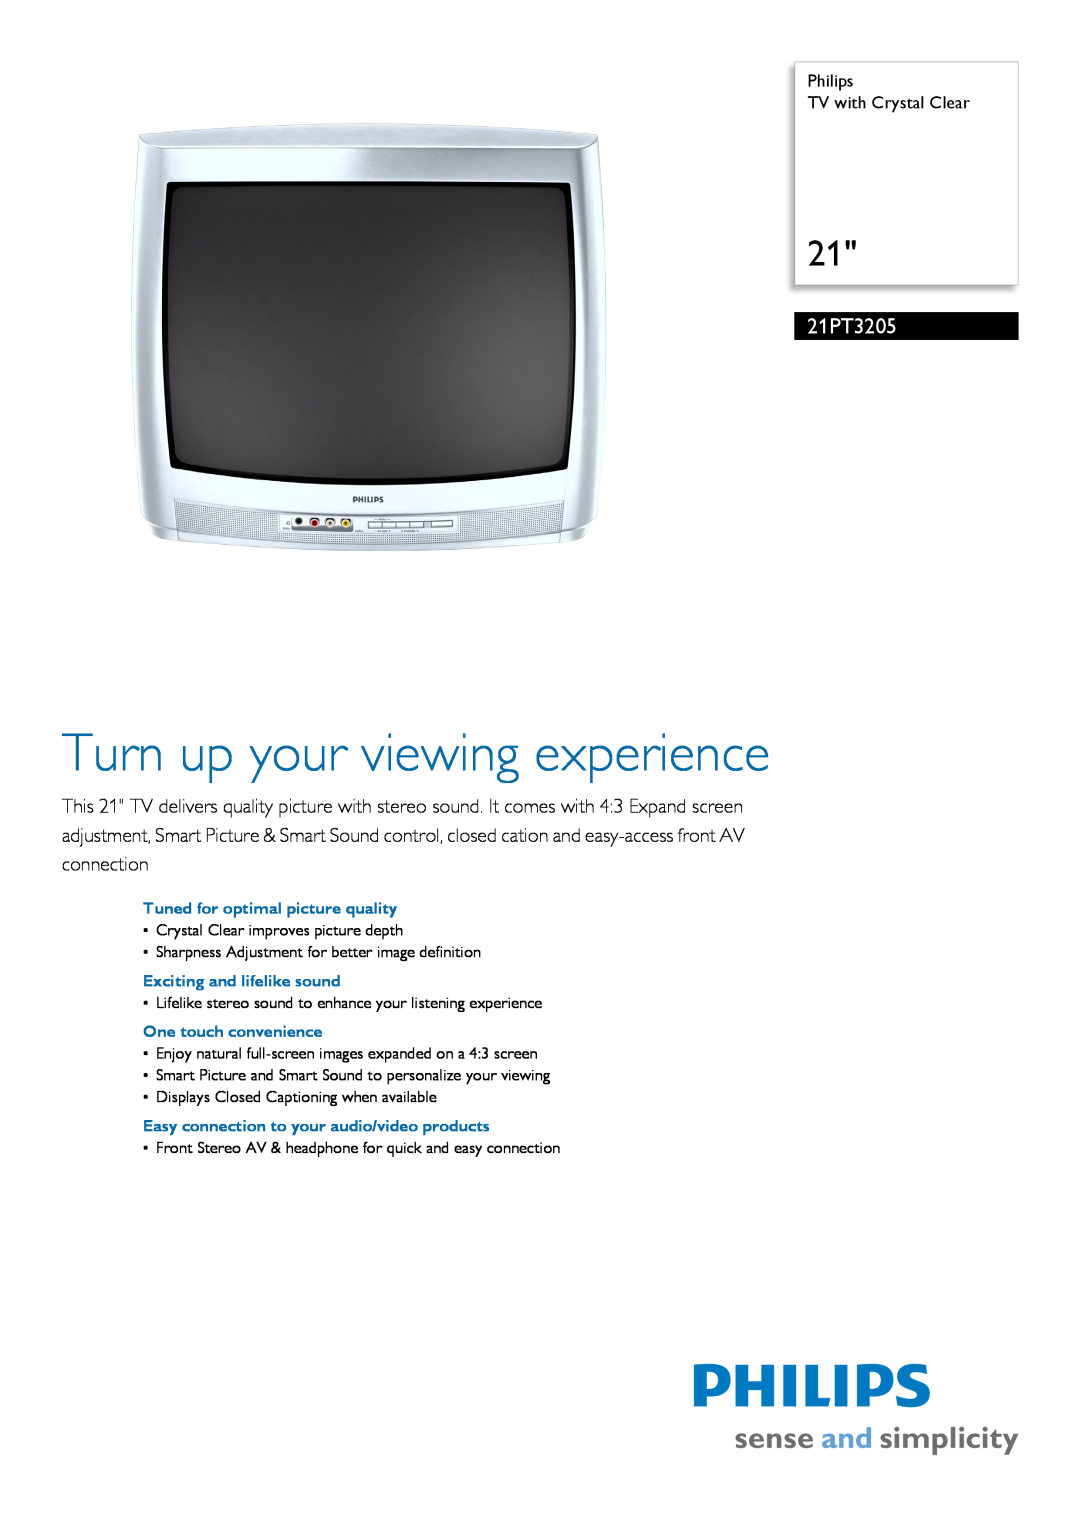 Philips 21PT3205/55 manual Philips TV with Crystal Clear, Turn up your viewing experience 